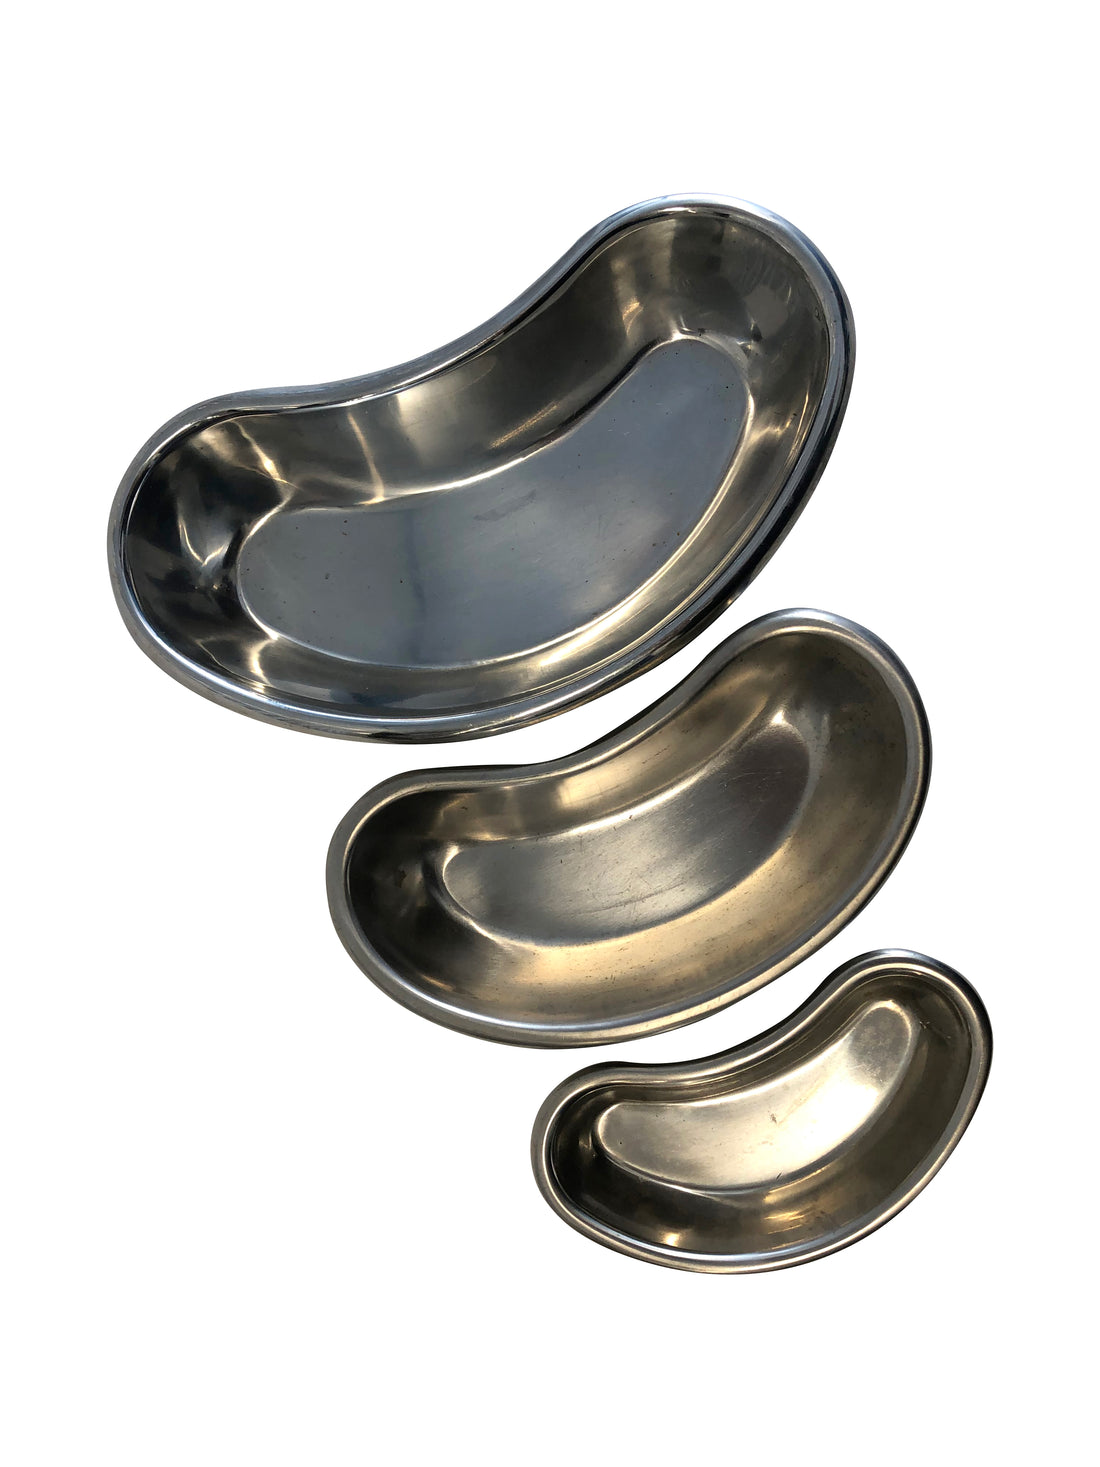 Bean-Shaped Stainless Steel Containers